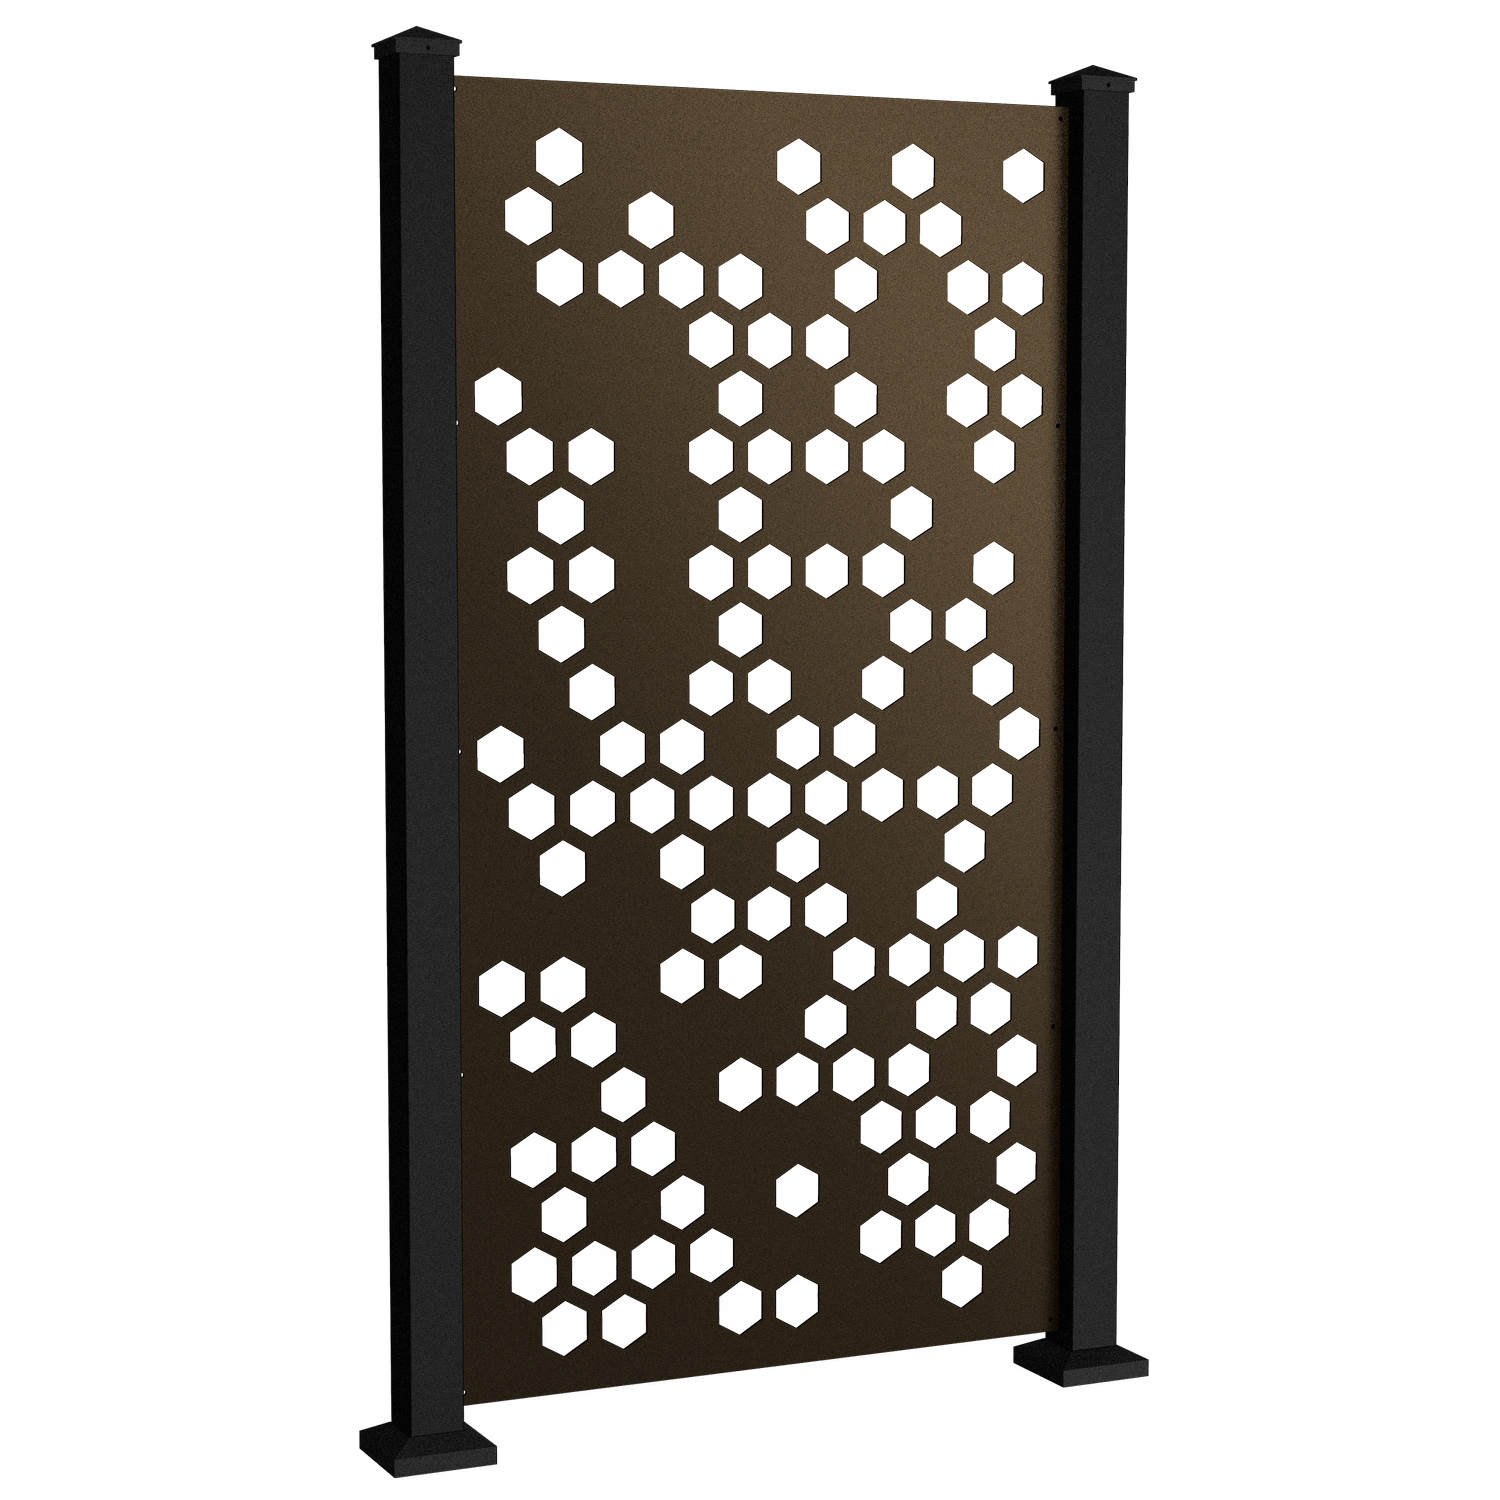 Privacy screen style Honeycomb in Bronze; high privacy choice